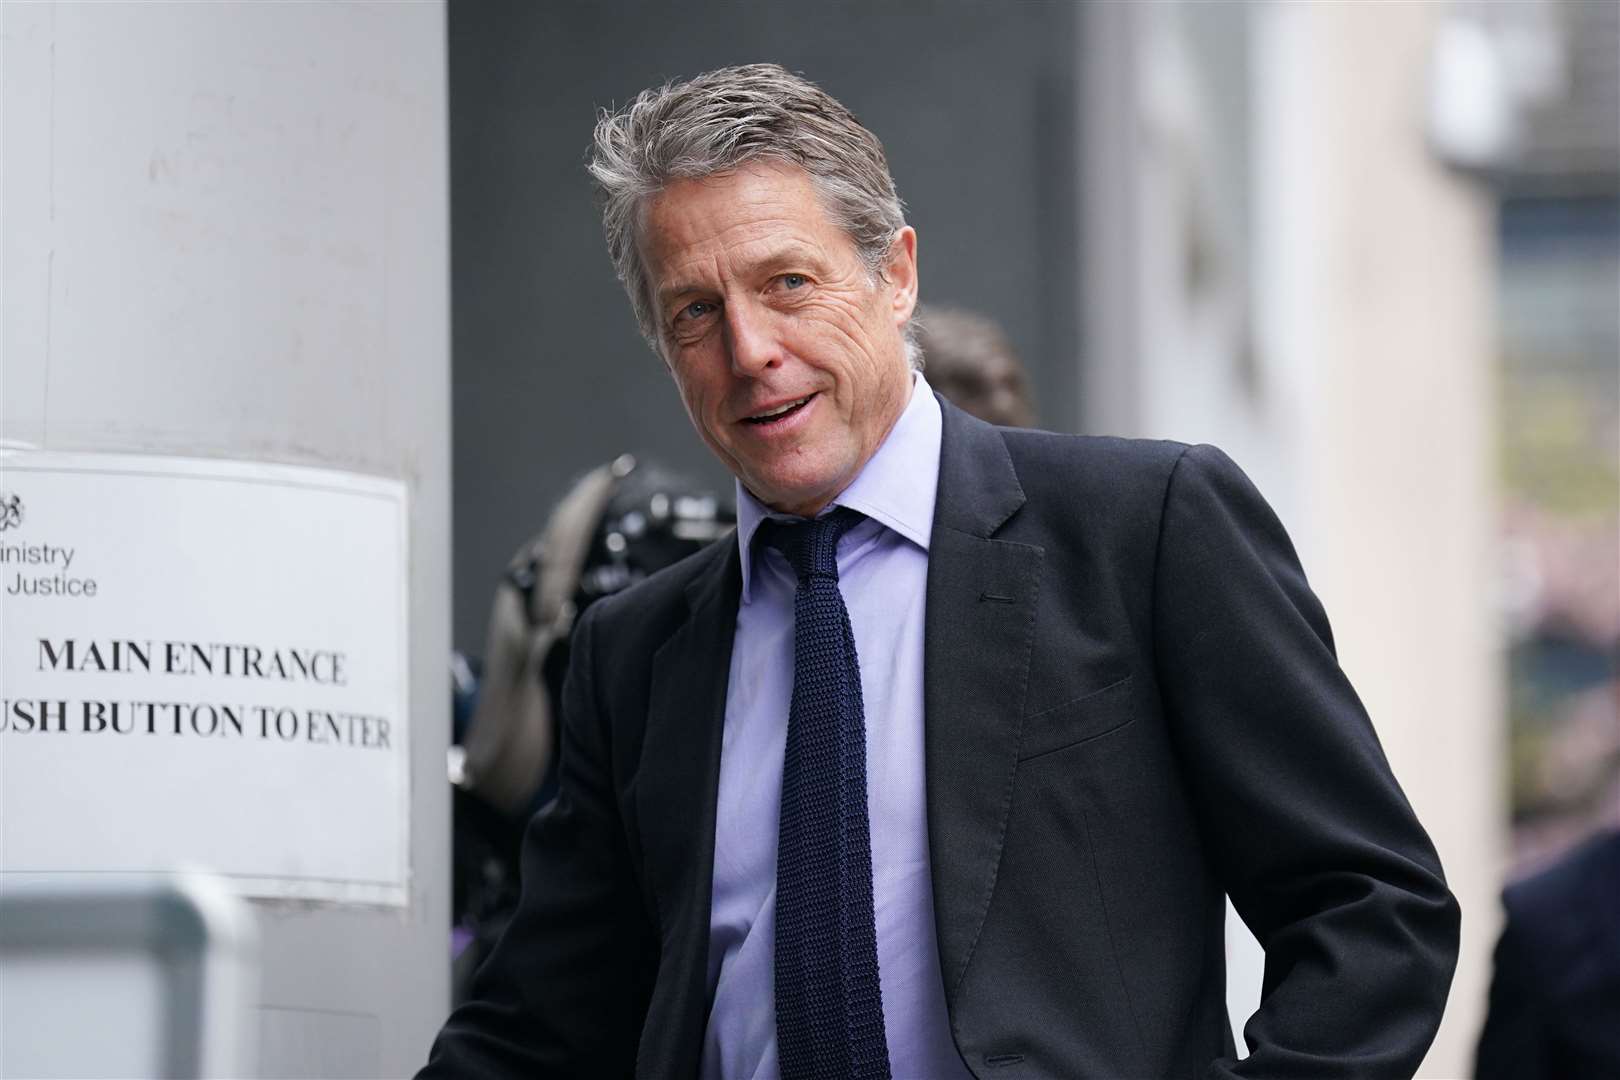 Hugh Grant at the Rolls Buildings in central London (James Manning/PA)